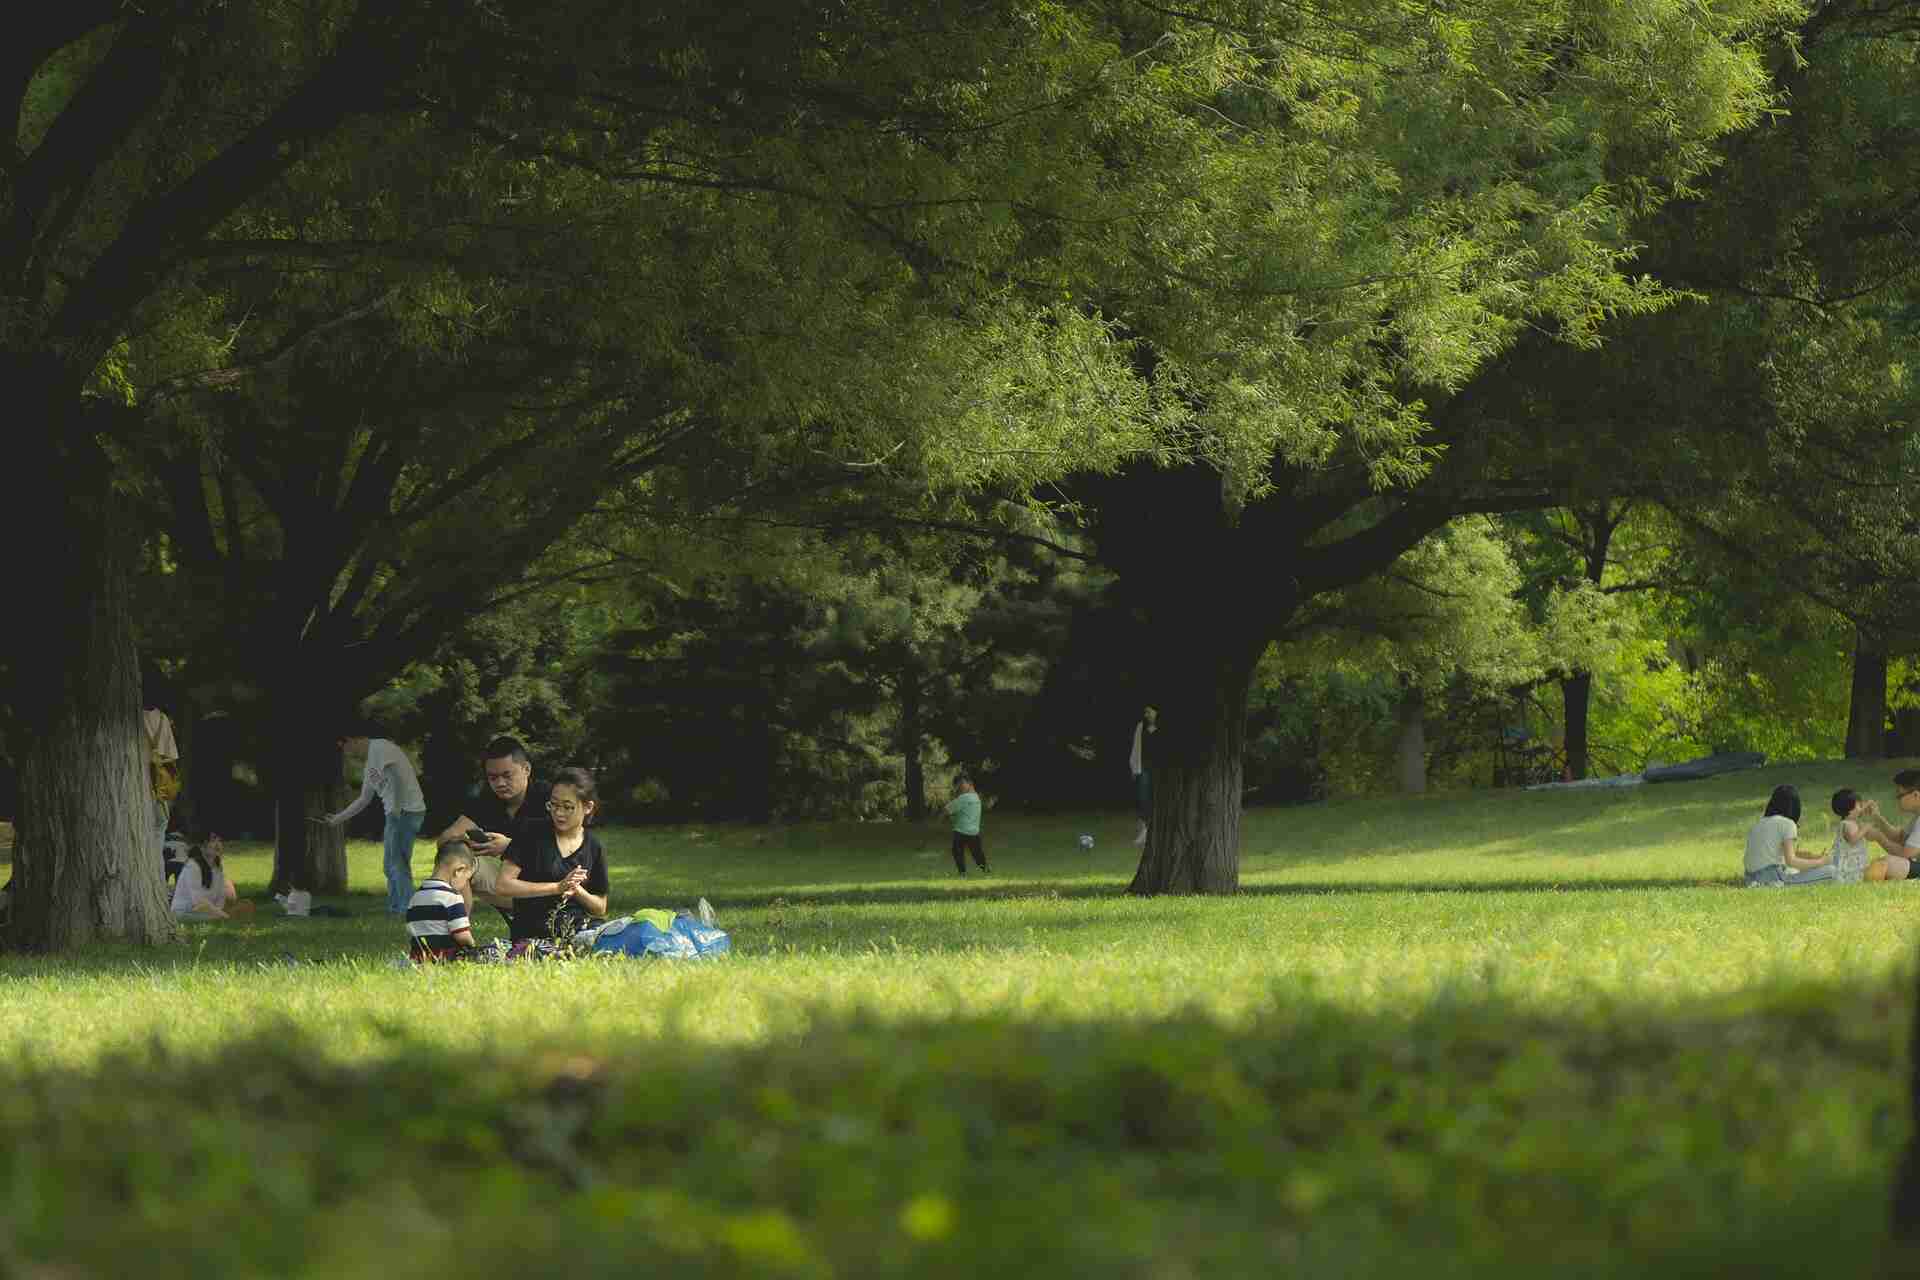 Families enjoying a day at a national park, sitting on the grass under the shade of large trees. The scene captures the peaceful and natural beauty of the park with people engaging in relaxed activities.